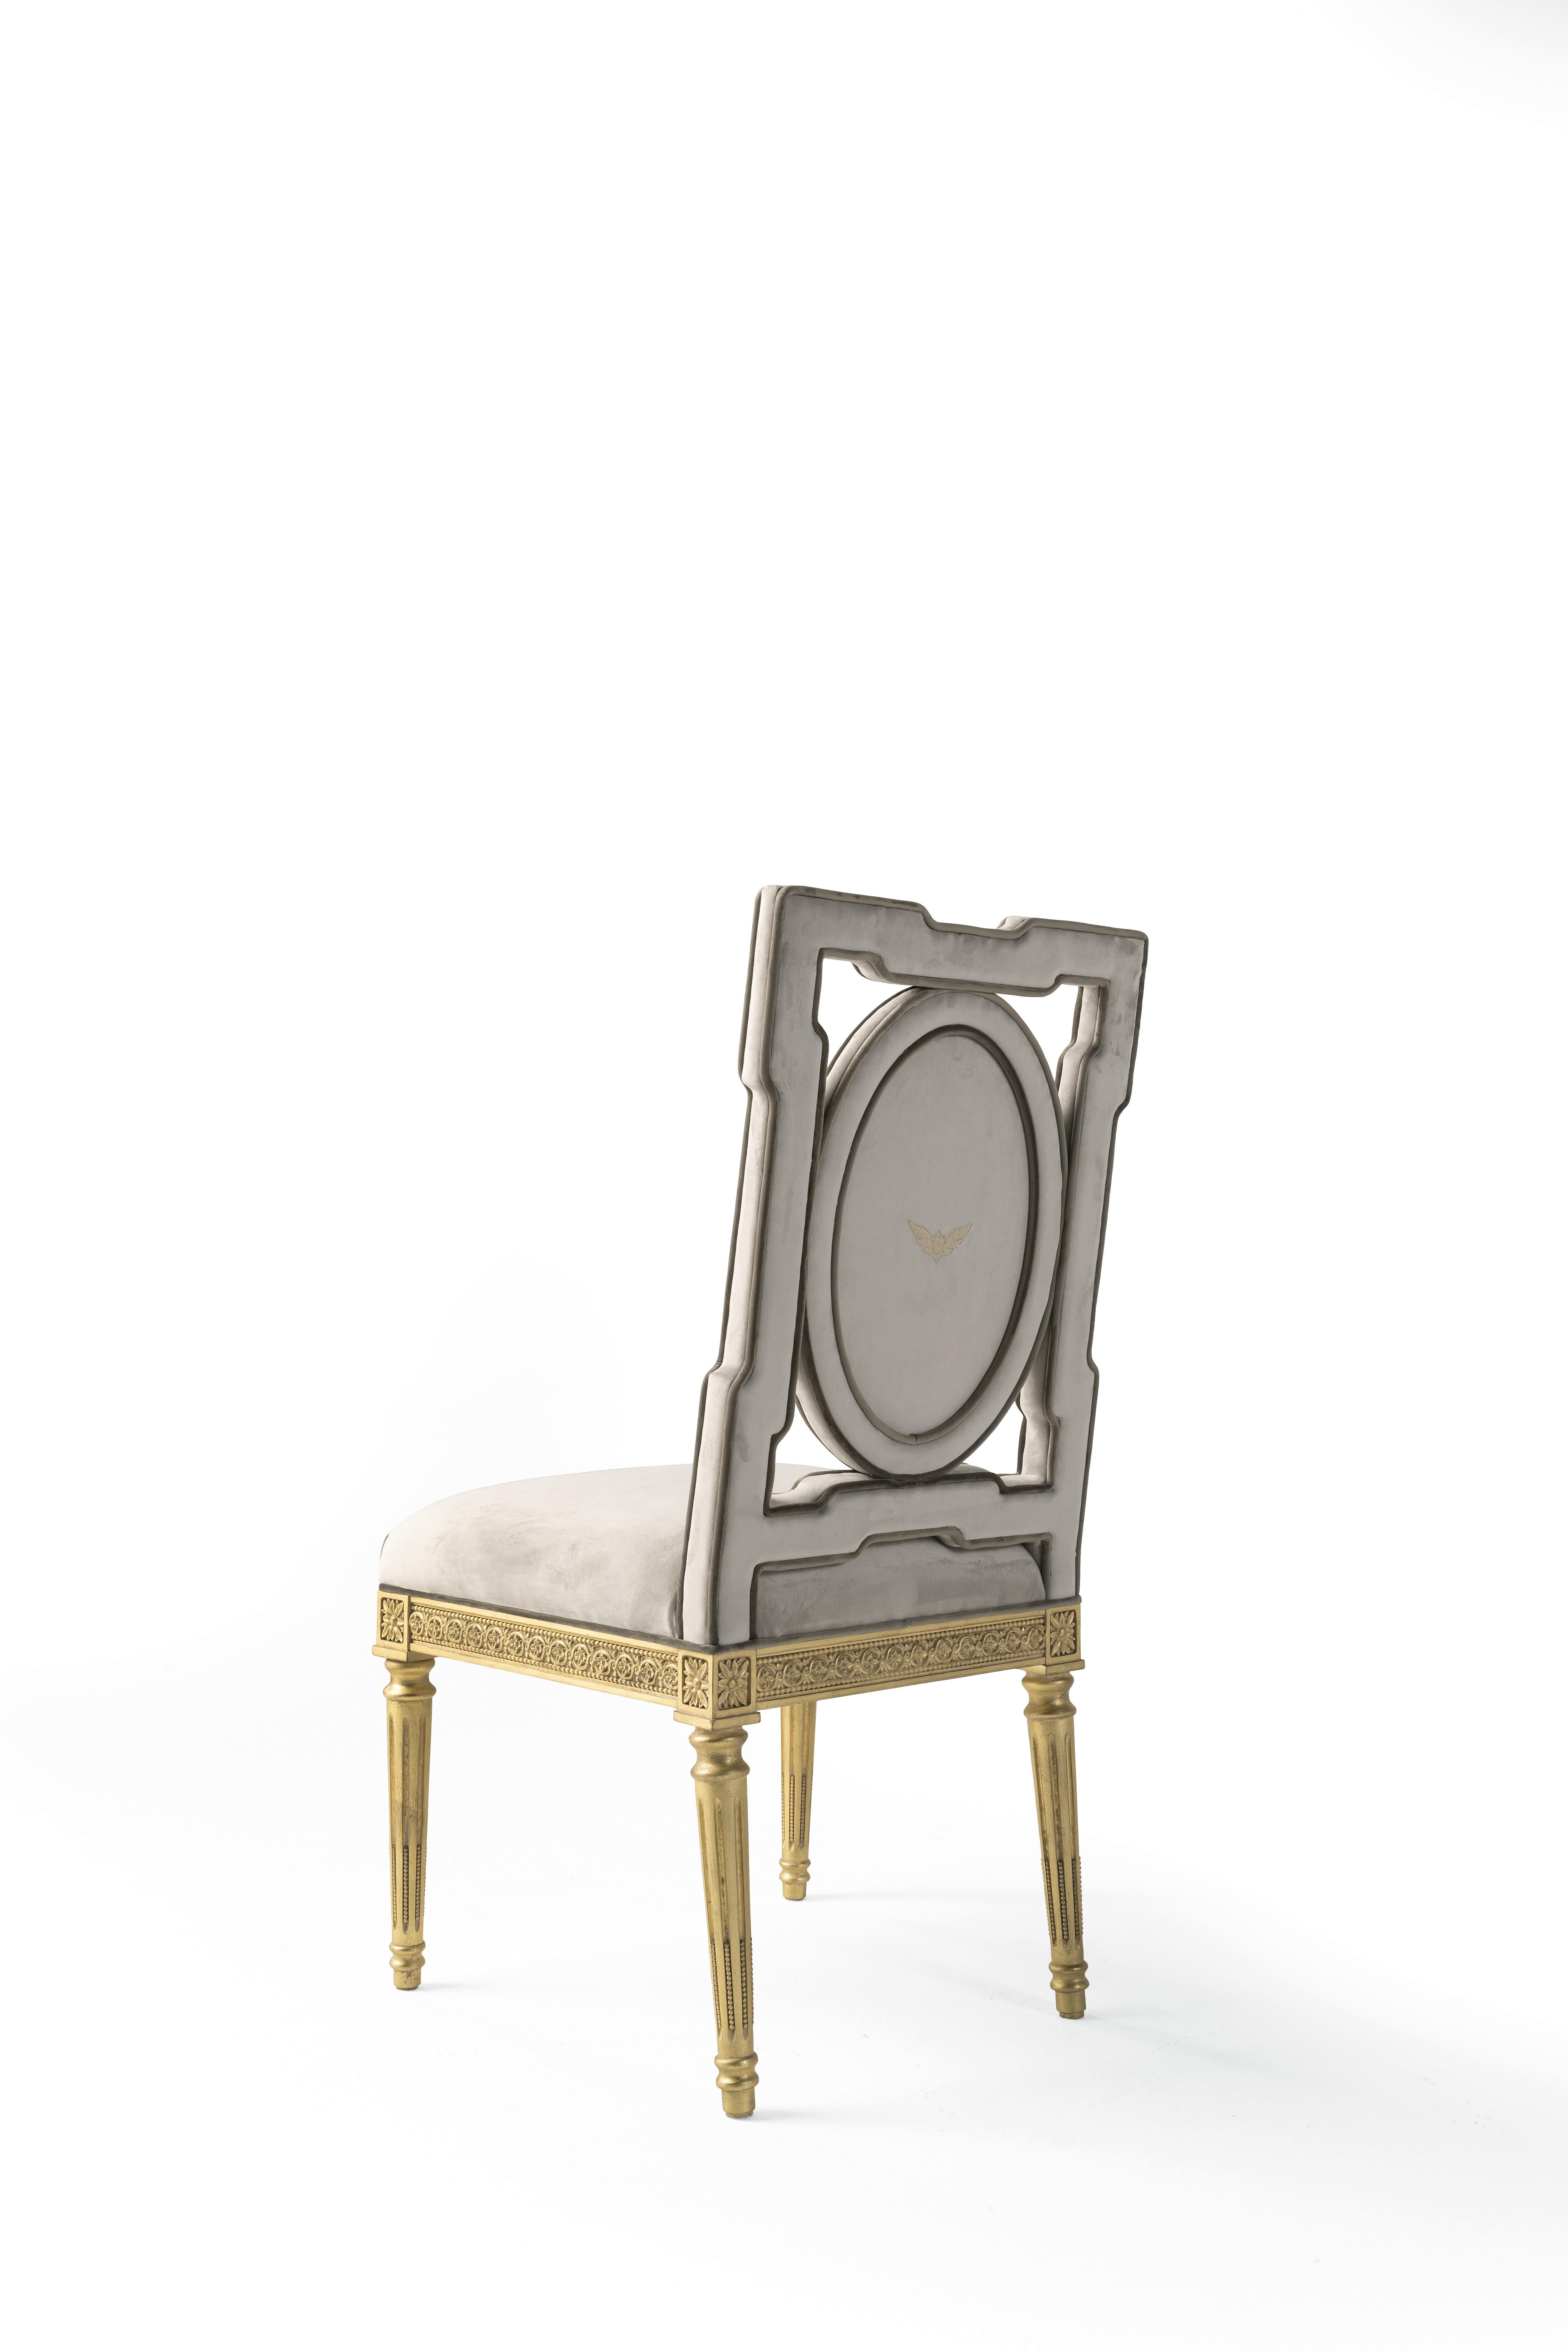 Italian 21st Century Satin Chair in Hand-carved Wood and Fabric in Style of Louis XVI For Sale